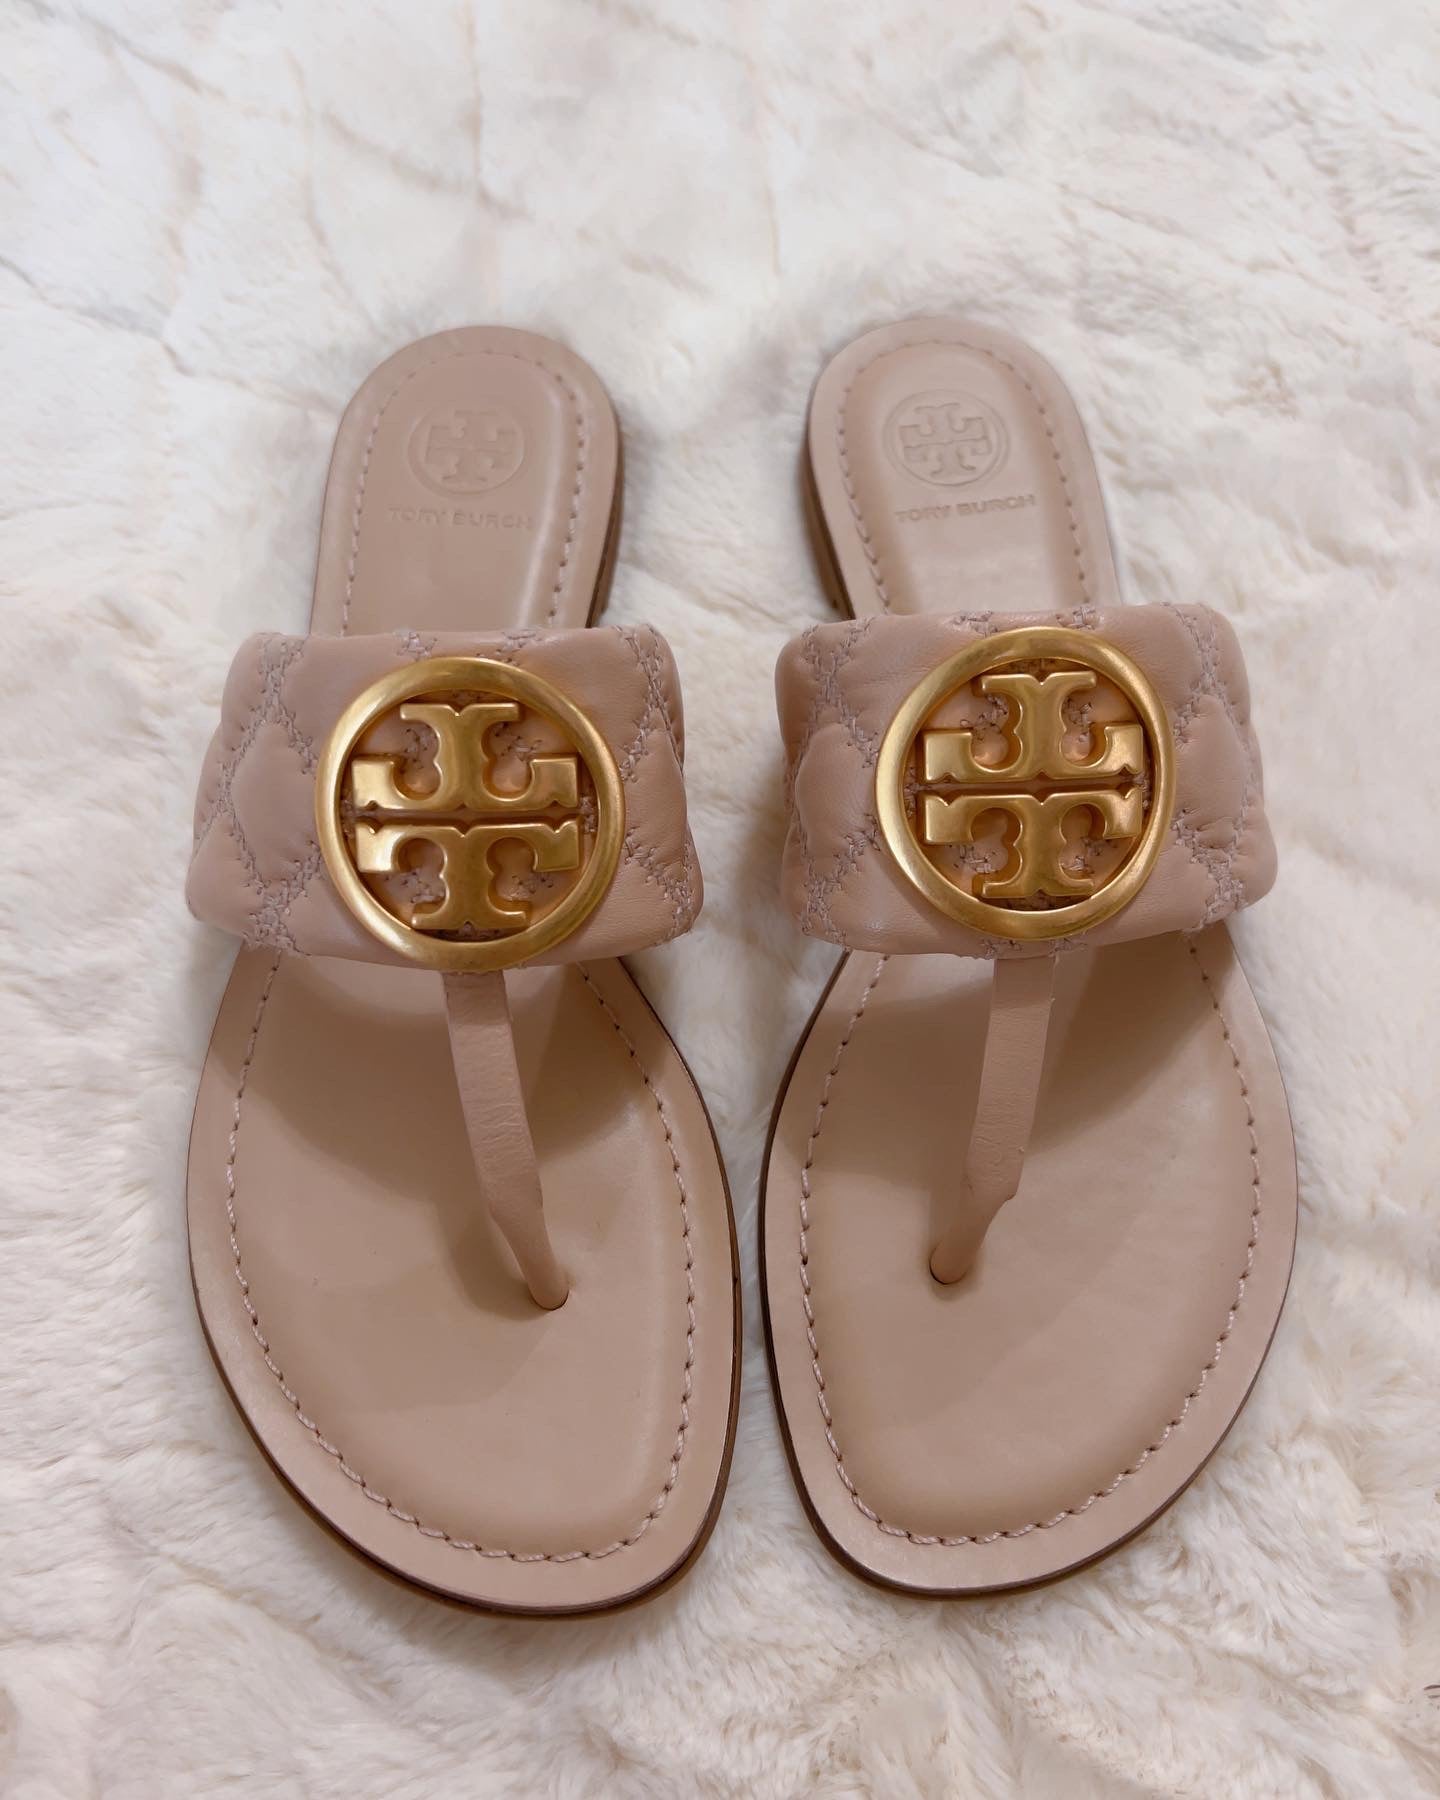 Tory Burch Benton Band Flat Sandal Quilted Nappa Leather, Goan Sand / Rolled, 7 & 8